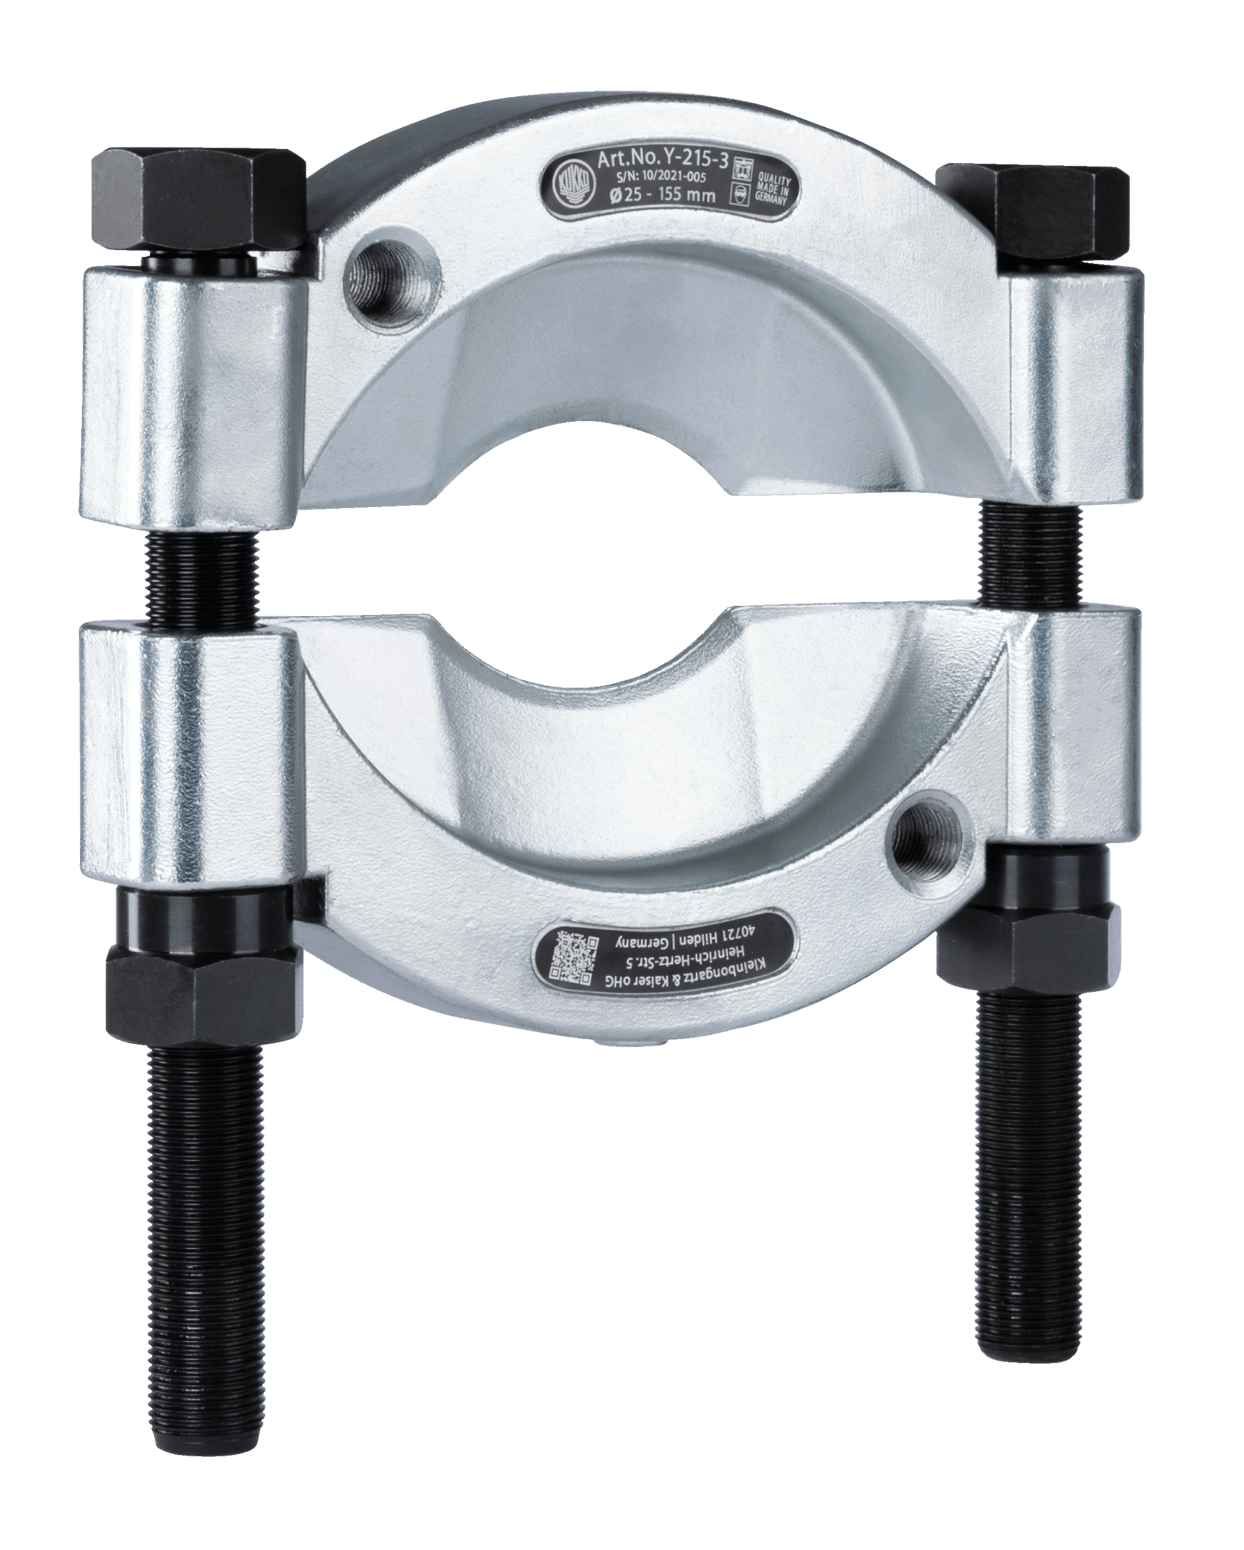 Kukko Y-515-7 Disconnecting device for hydraulic puller/puller - Apollo Industries llc